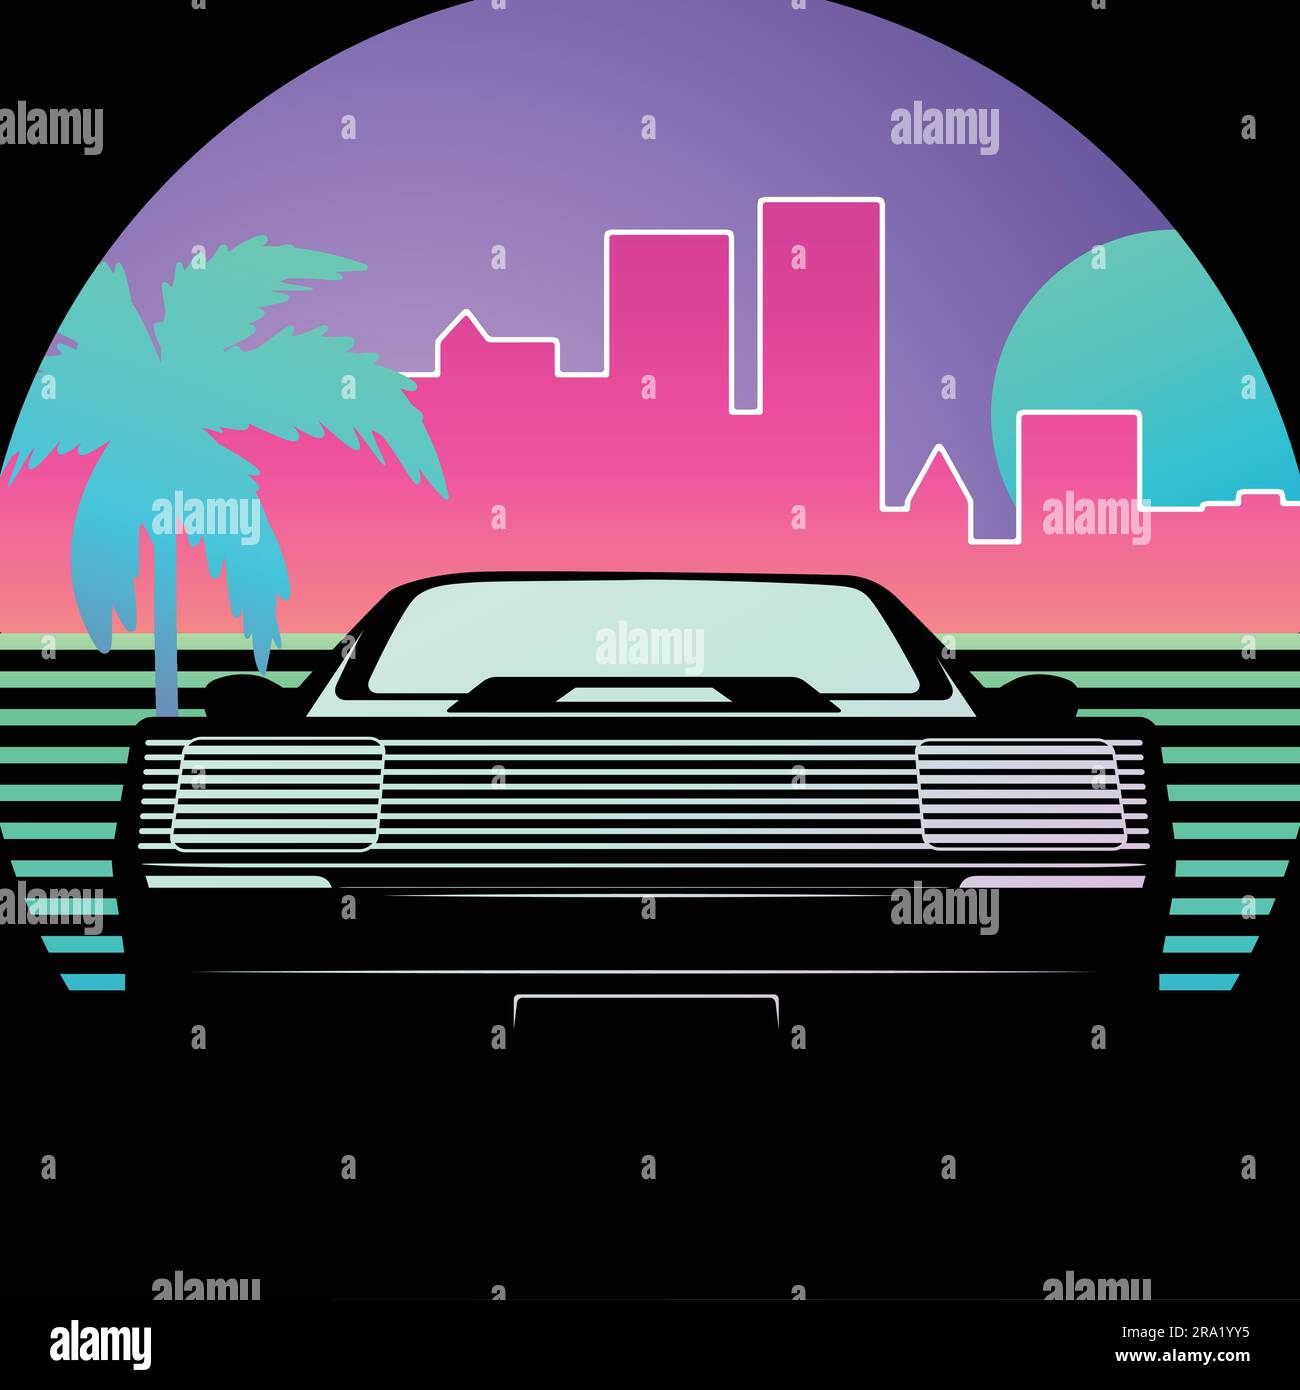 Retro-style 1980's illustration of a sports car, vibrant pink 80's style city skyline in background. Stock Vector